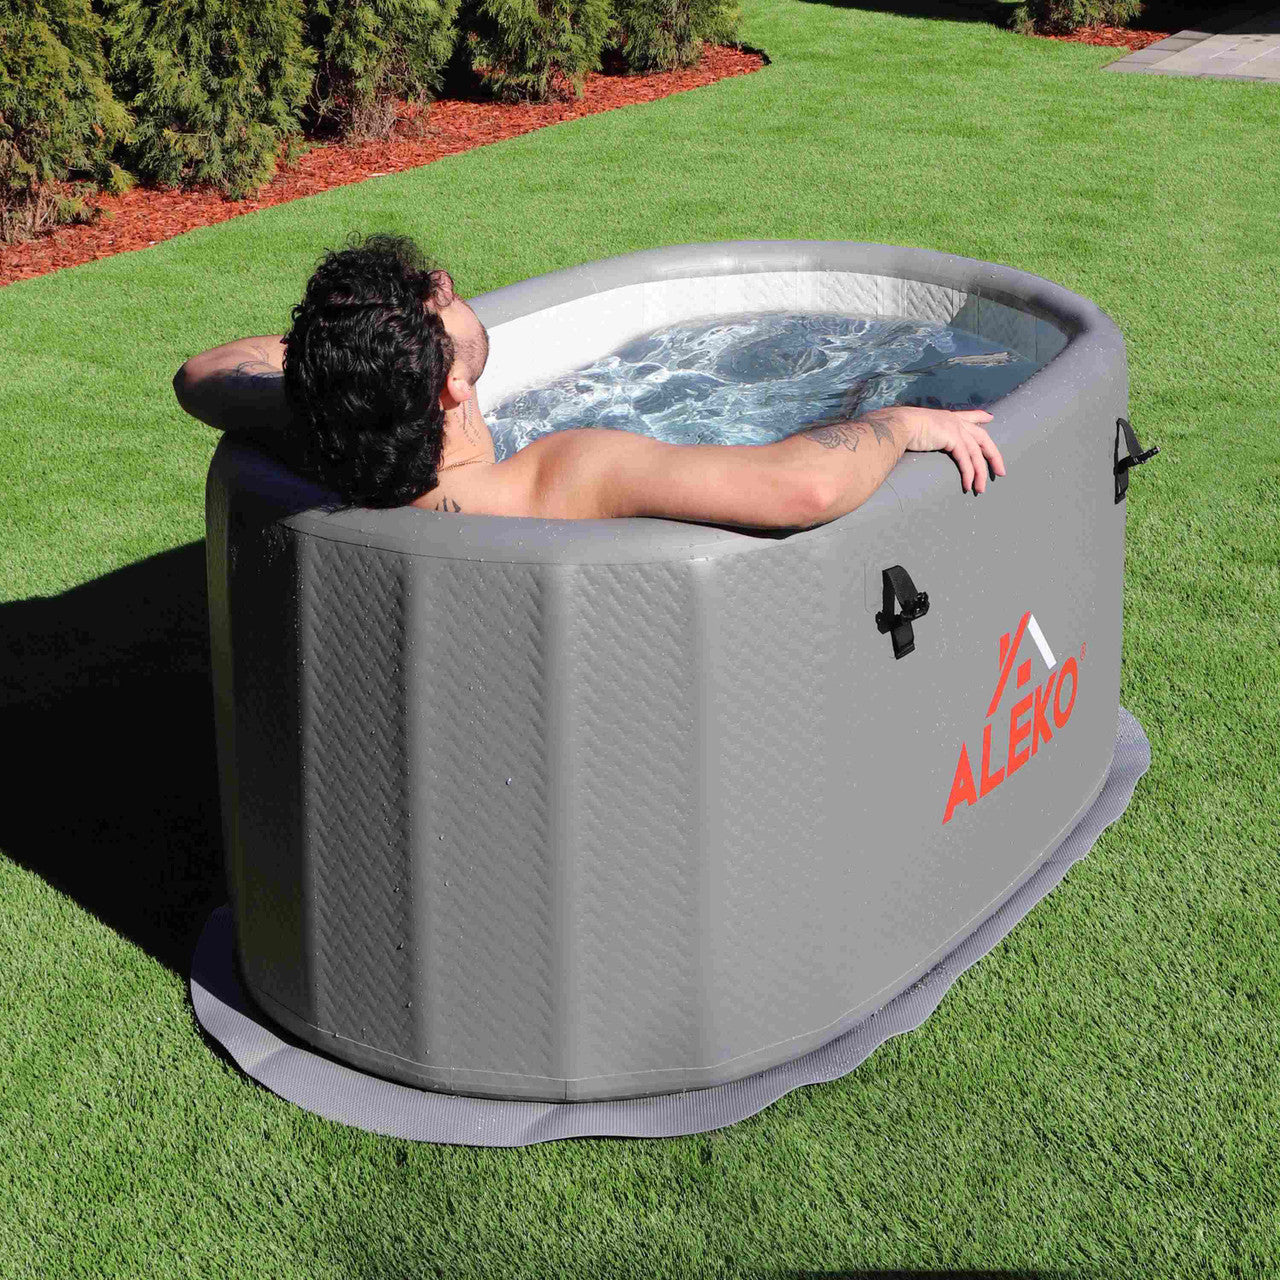 Inflatable Cold Plunge with Locking Lid and Carry Bag